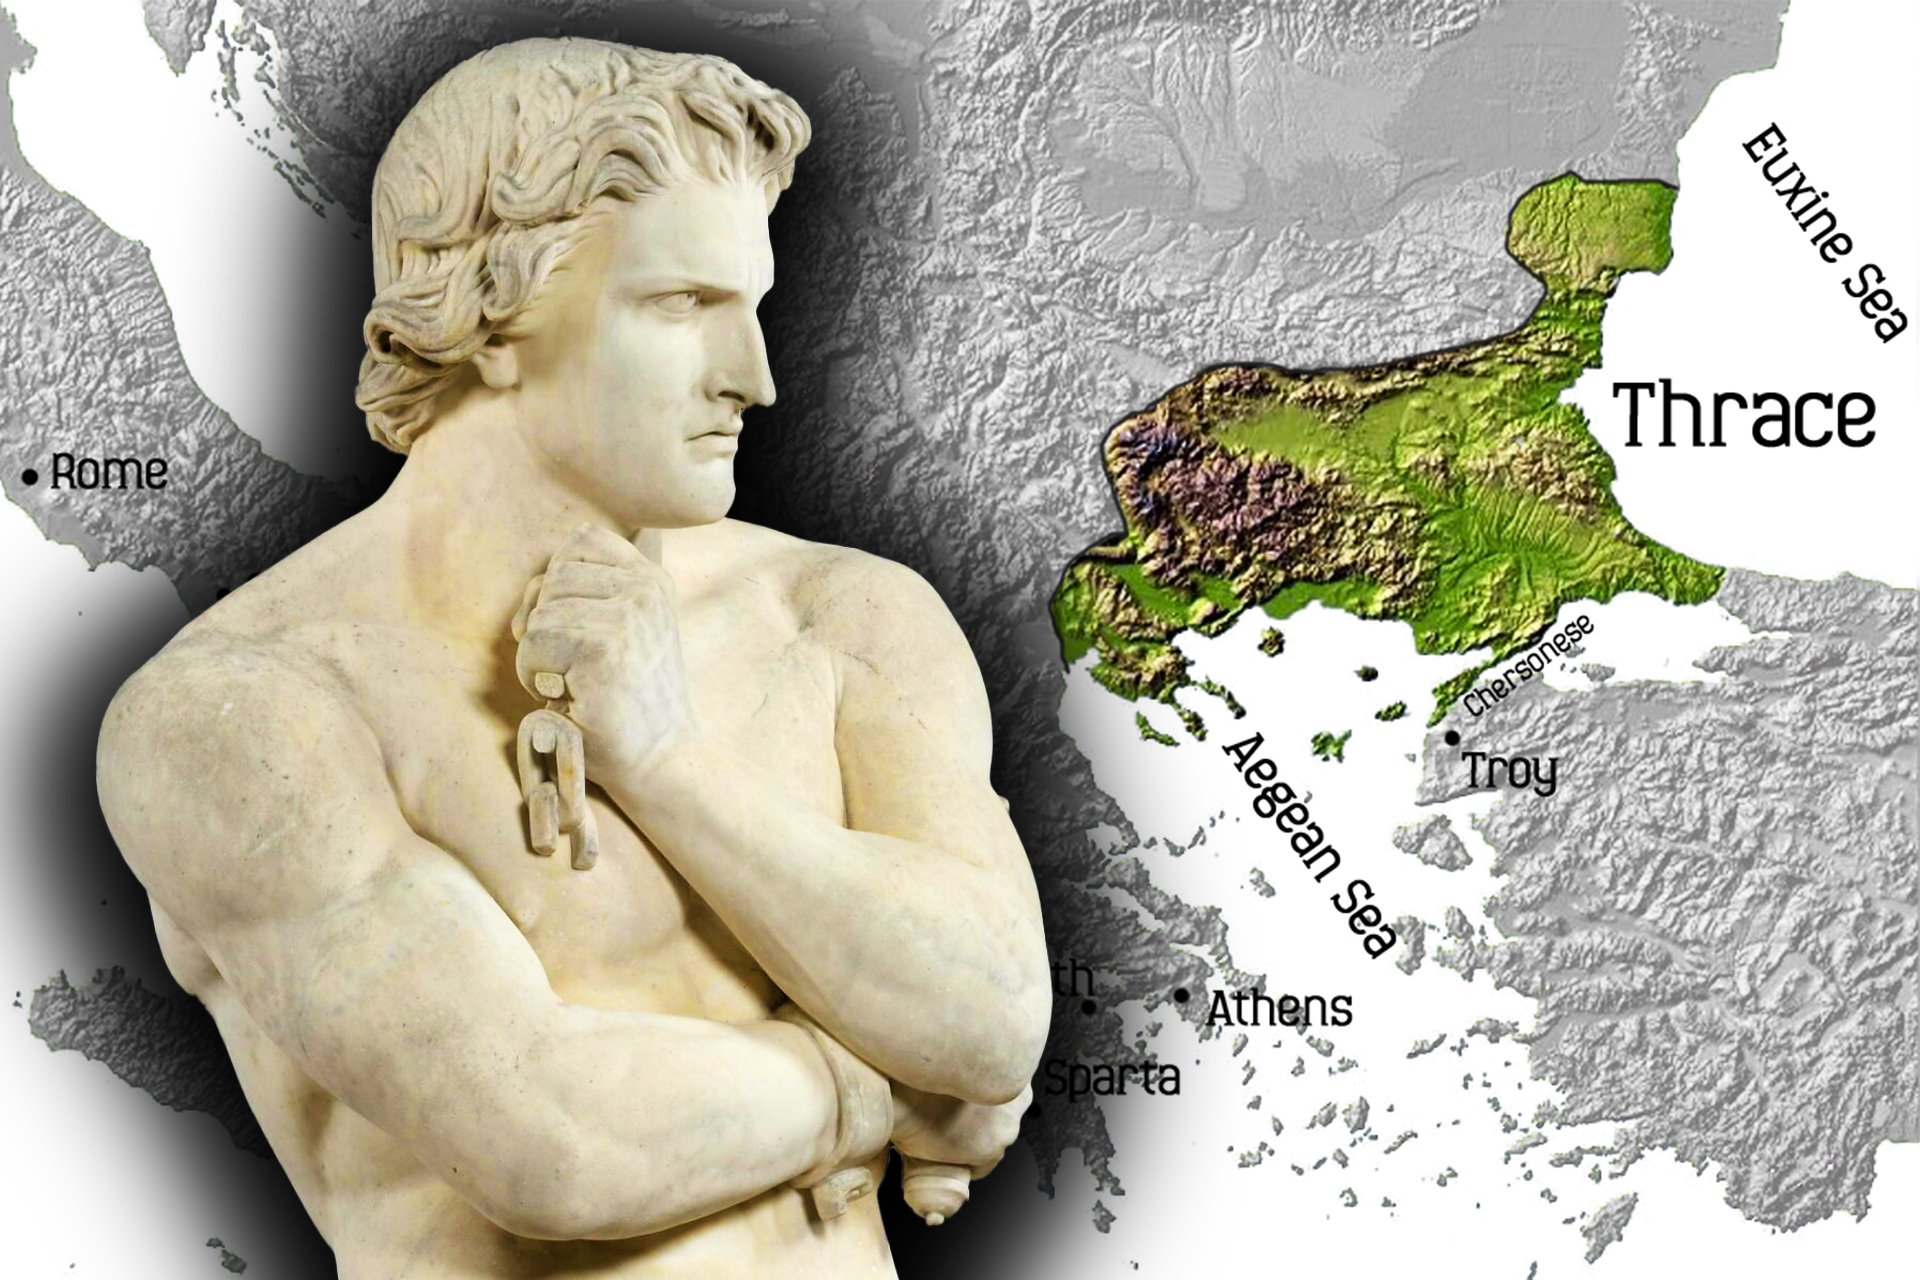 A composite image featuring a detailed statue of Spartacus on the left side, depicted with a thoughtful expression and holding chains, juxtaposed against a grayscale map of ancient Europe on the right. The map prominently highlights the region of Thrace, situated between the Aegean Sea and the Black (Euxine) Sea. Important cities and landmarks such as Rome, Athens, Sparta, Troy, and Chersonese are labeled. The region of Thrace is colored in a contrasting green shade for emphasis.